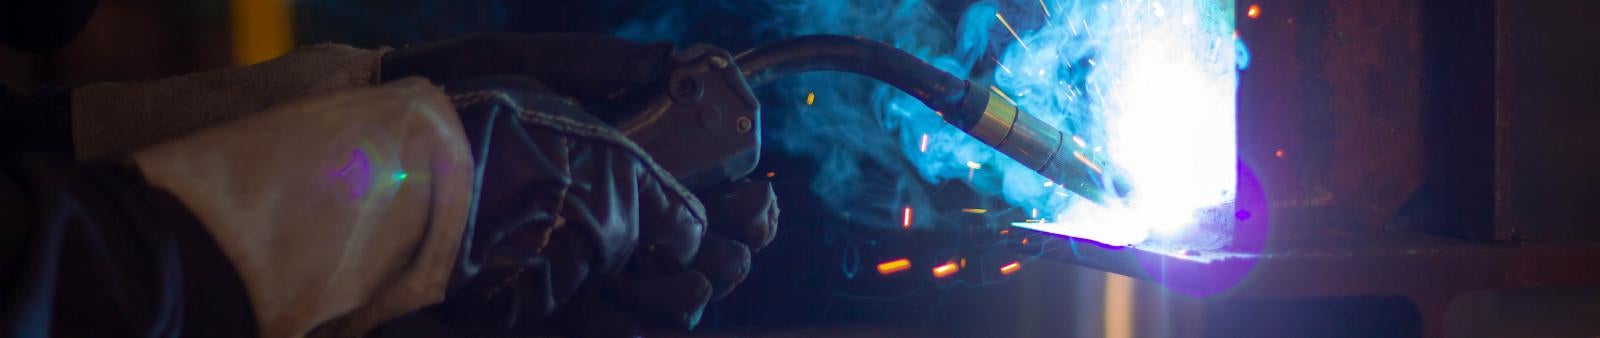 Welding for Manufacturing- Basic Banner Image